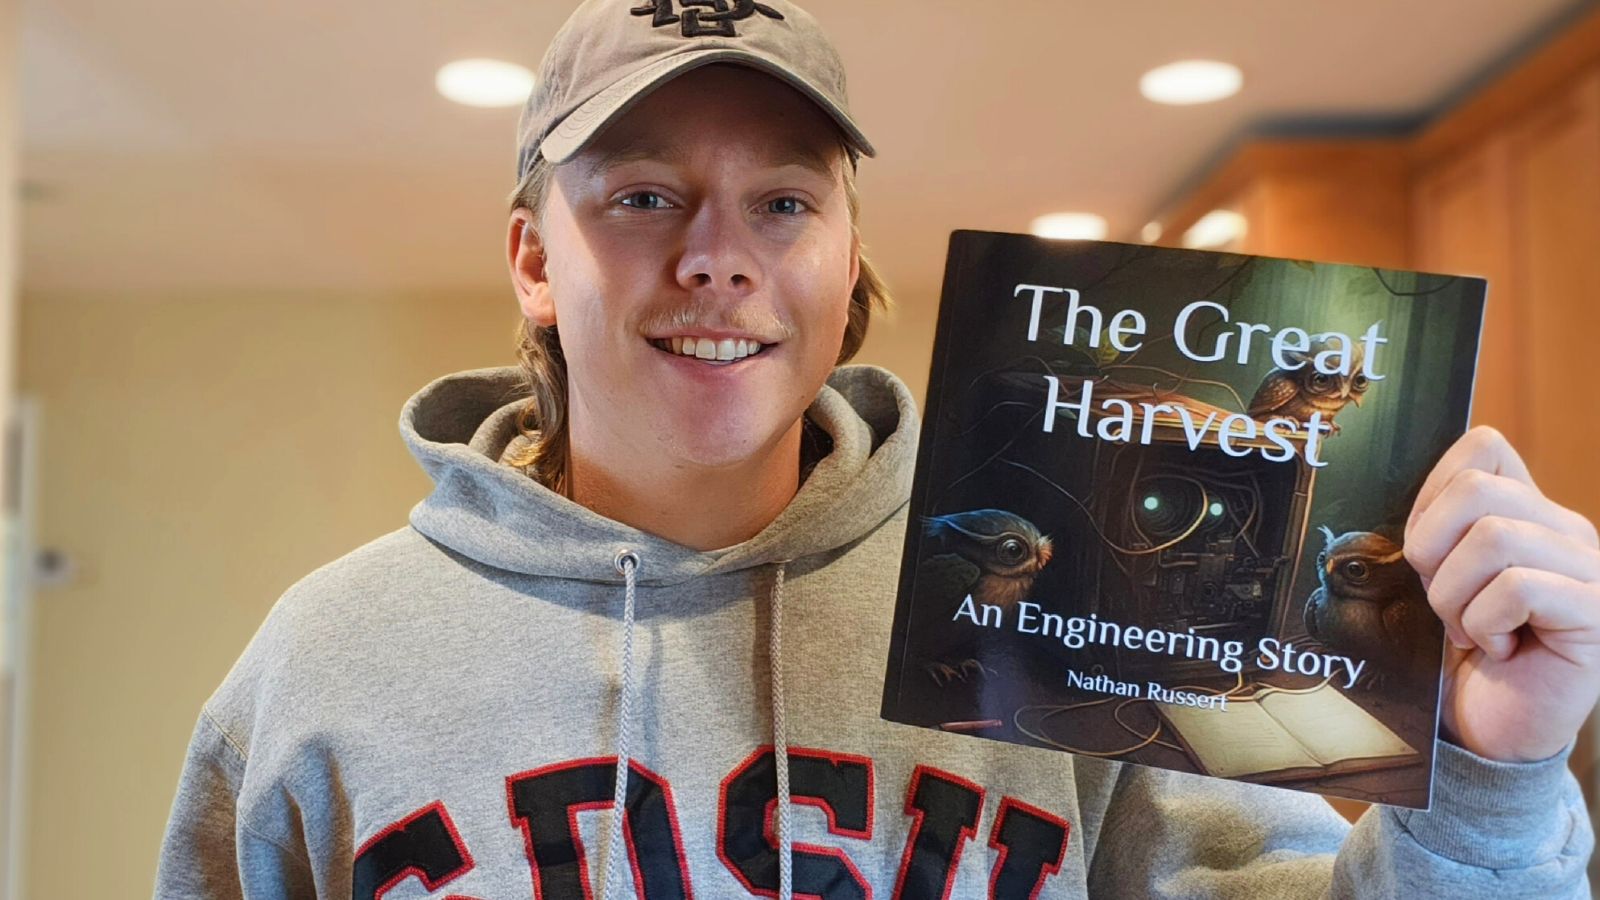 The Great Harvest: An Engineering Story